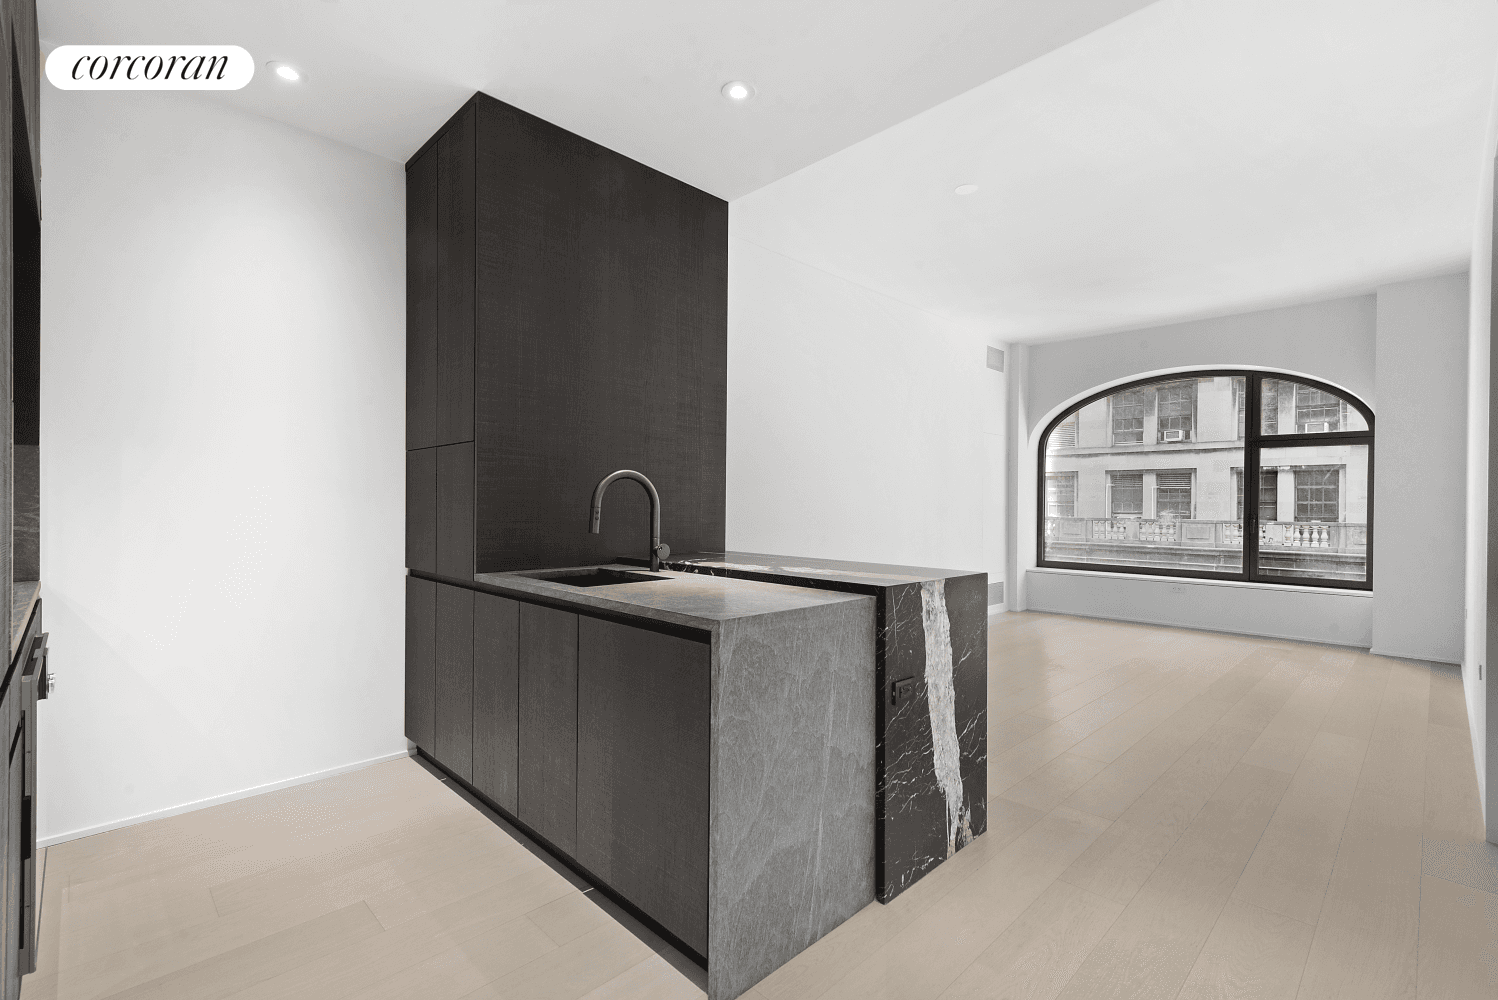 Welcome to Apt 14C a premium convertible two bedroom with soaring 10 foot ceilings and oversized arched windows in Sir David Adjaye's 130 William !